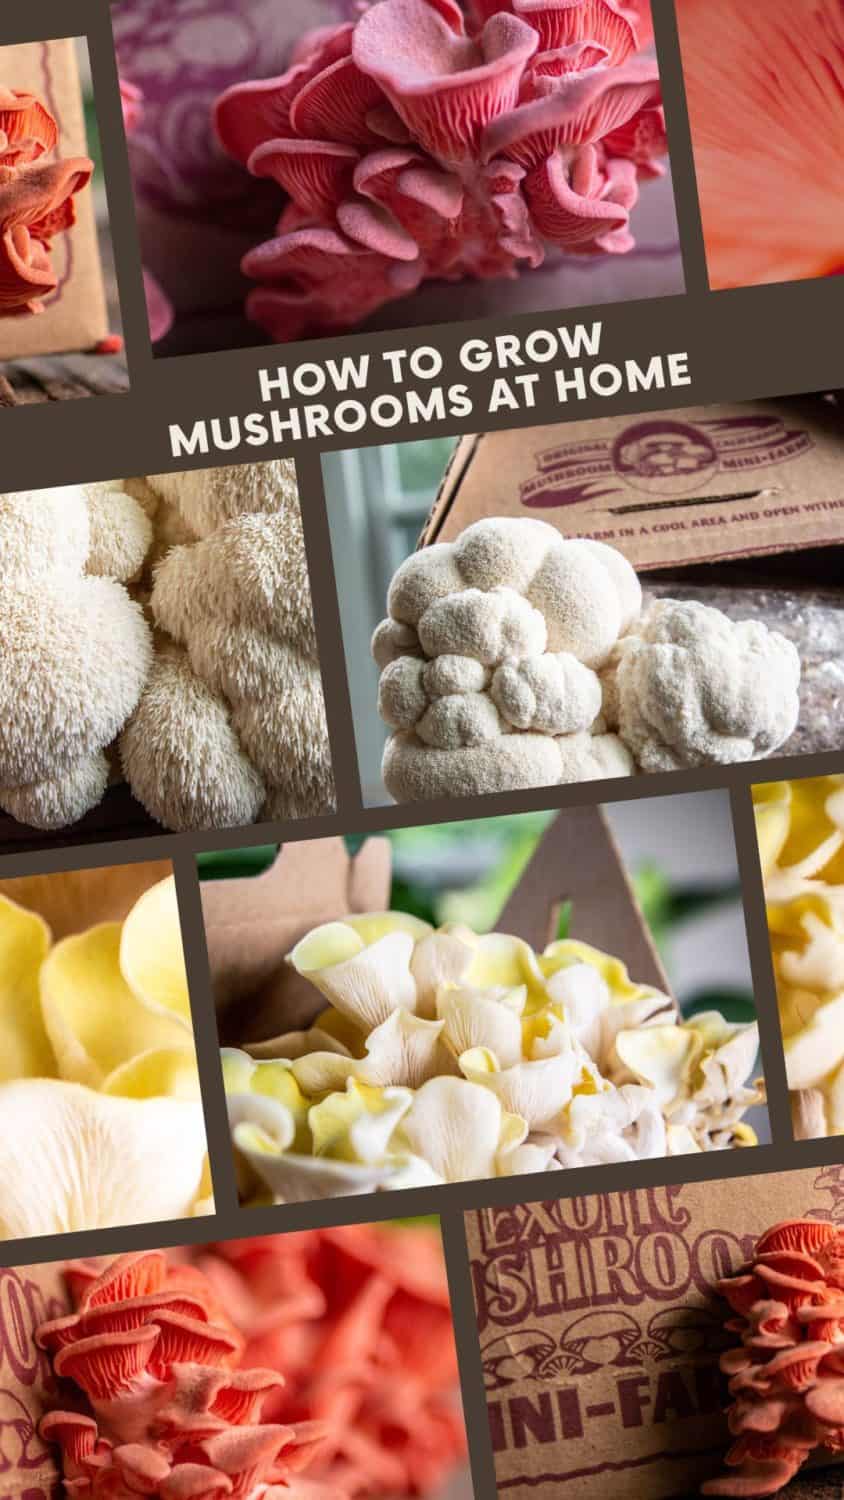 How to grow mushrooms at home graphic